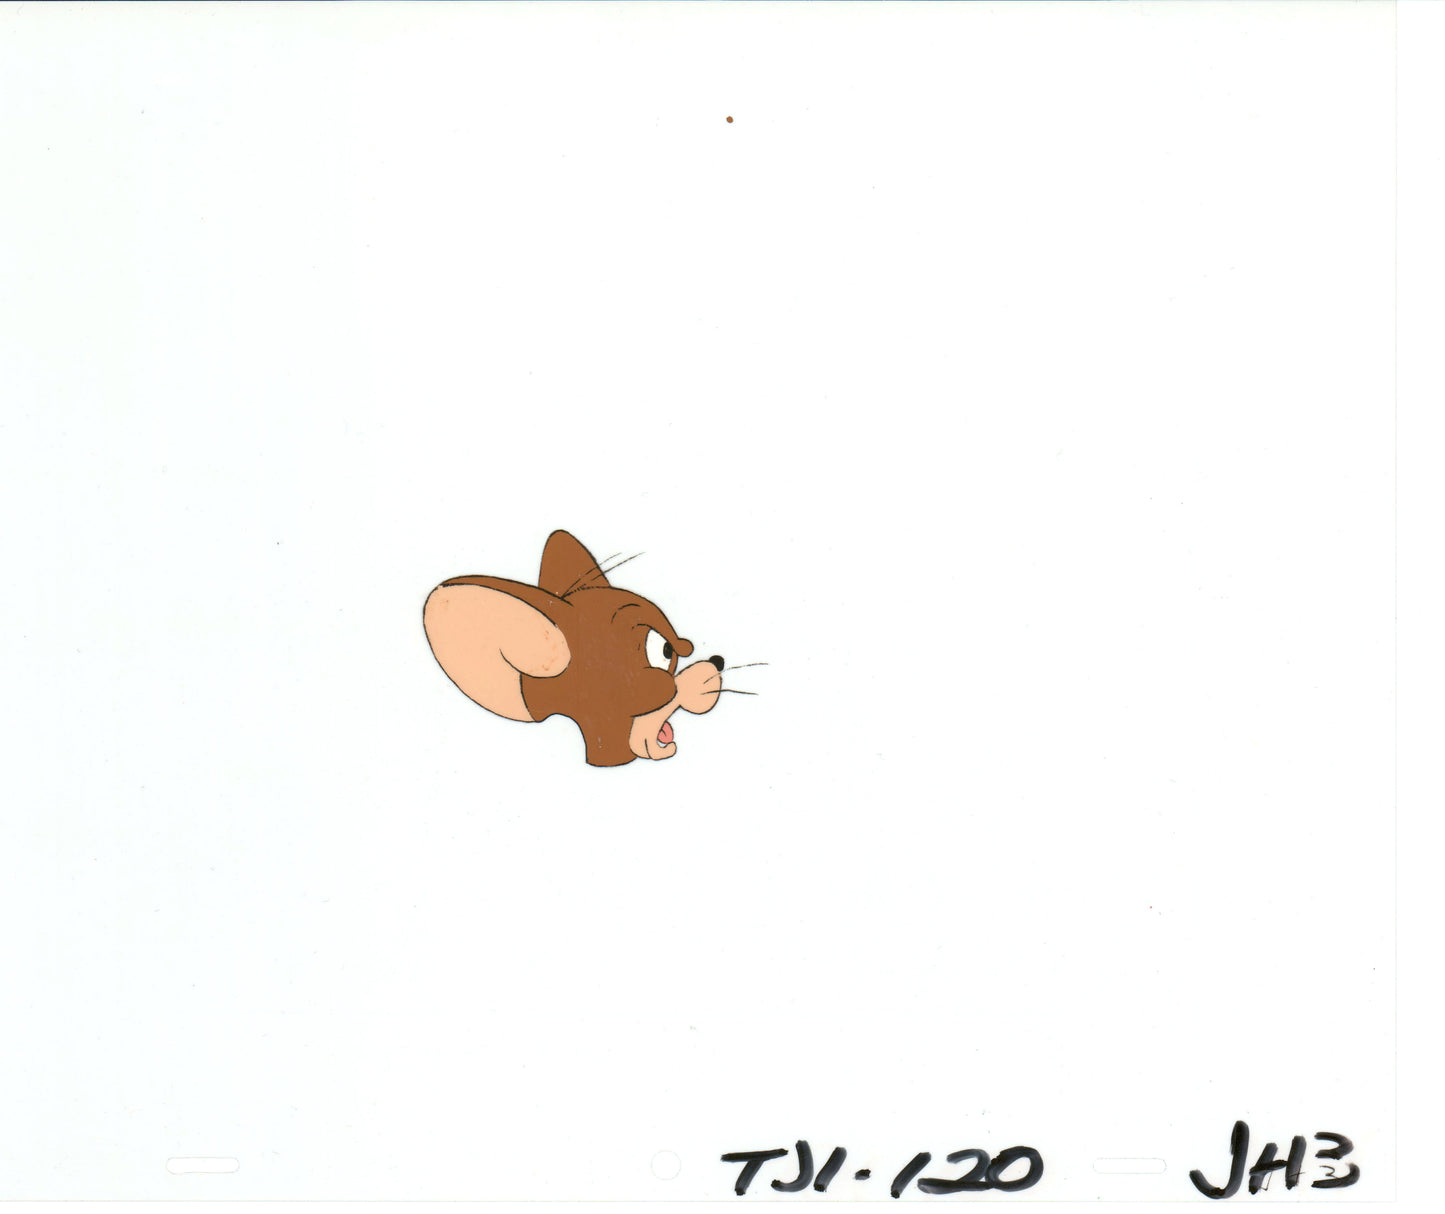 Tom and Jerry Original Production Animation Cel from Filmation 1980-82 b4245